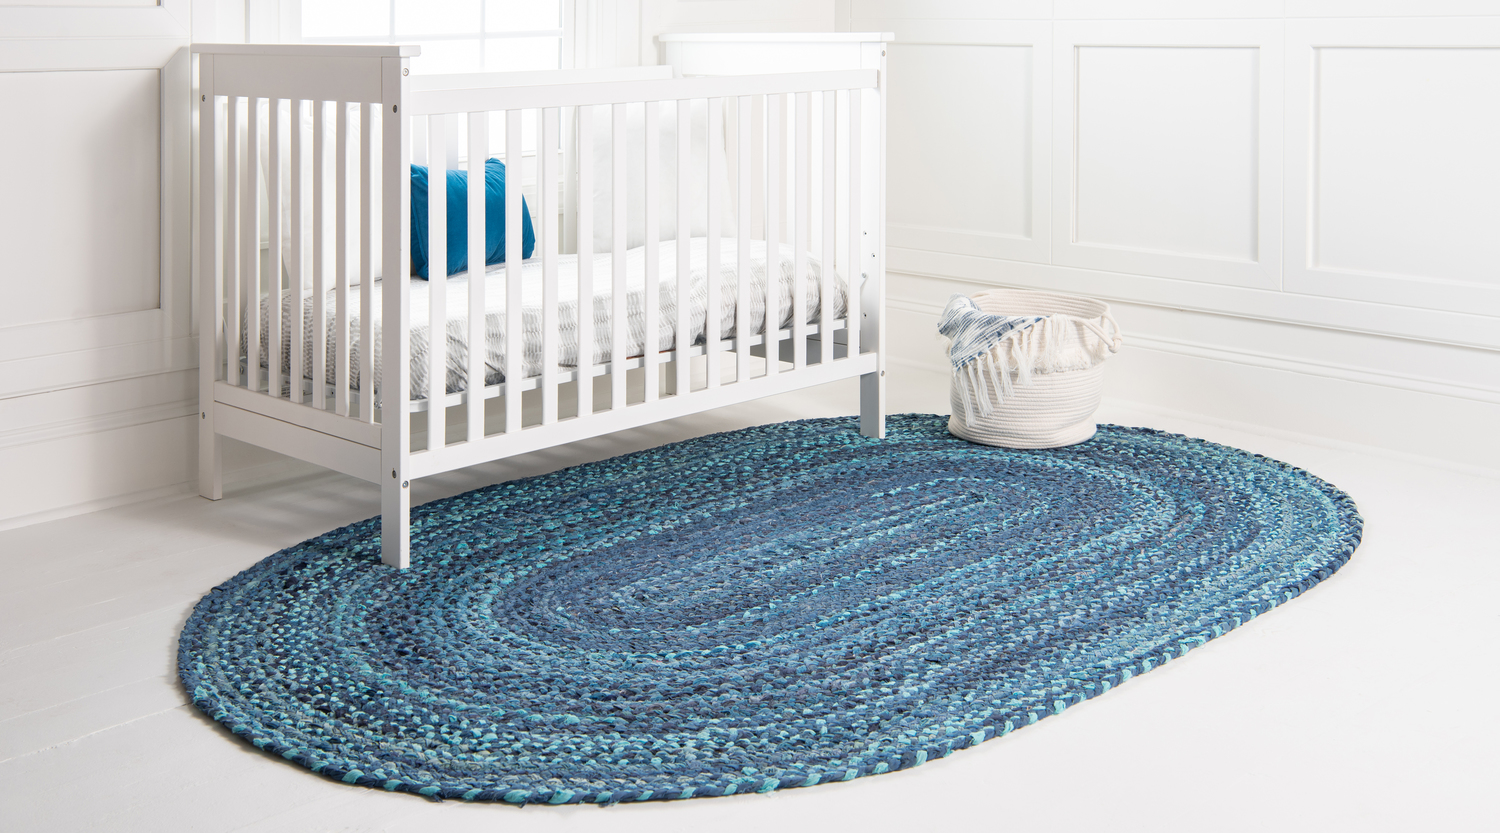 extra large area rugs Unique Loom Area Rugs Blue Hand Braided; 5x3